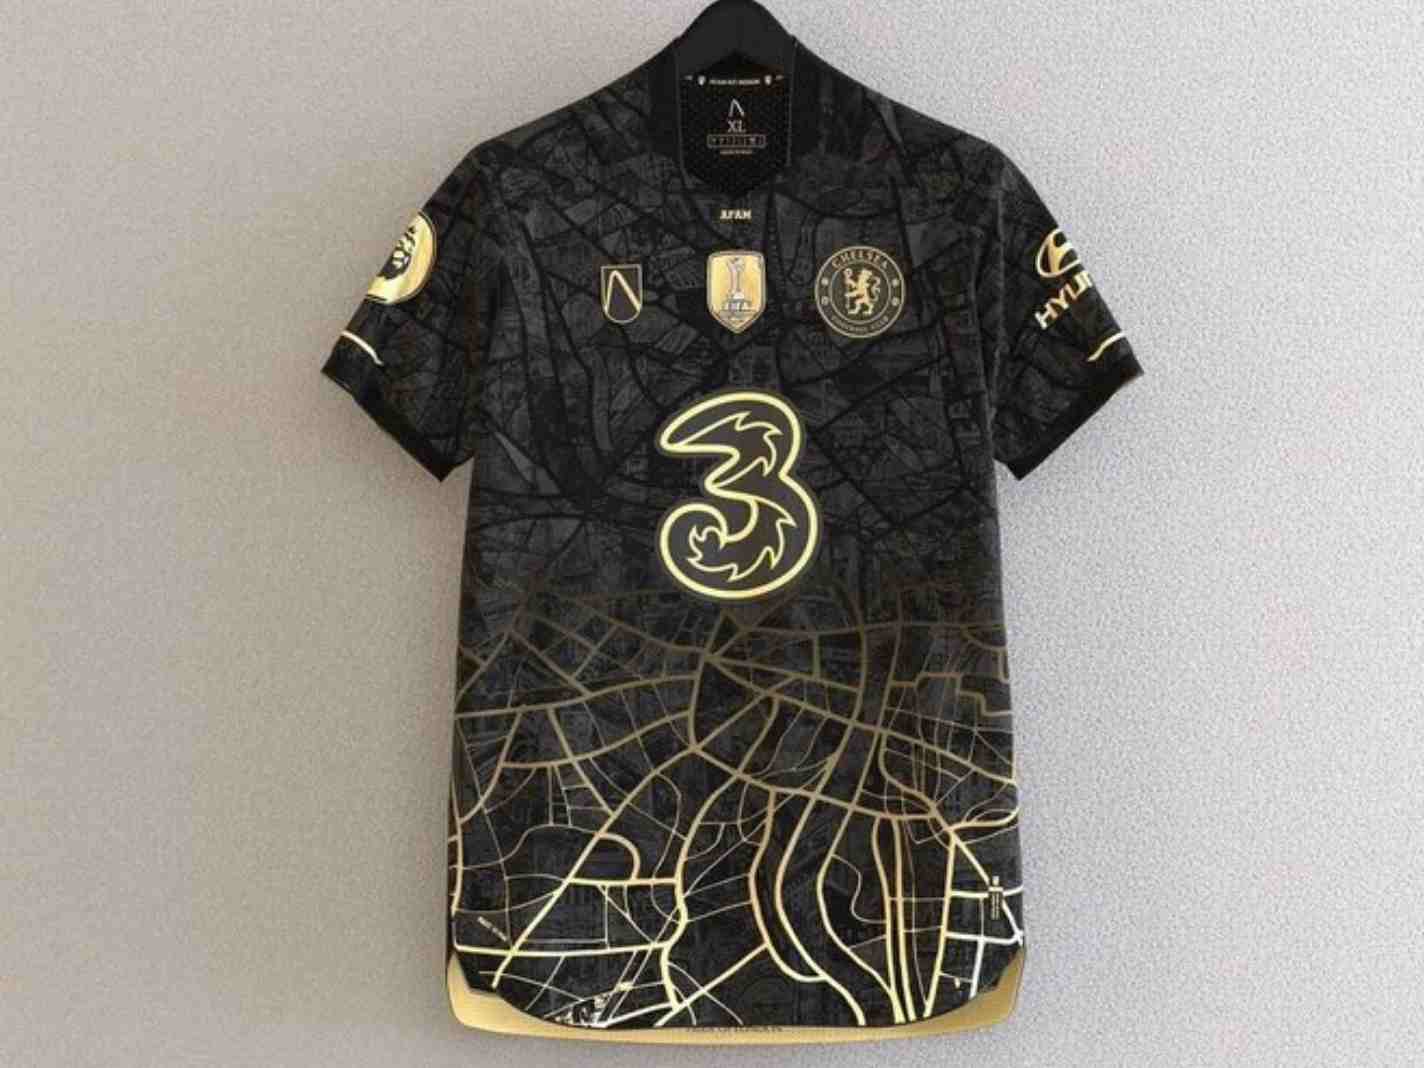 New Chelsea concept kit features a map of London